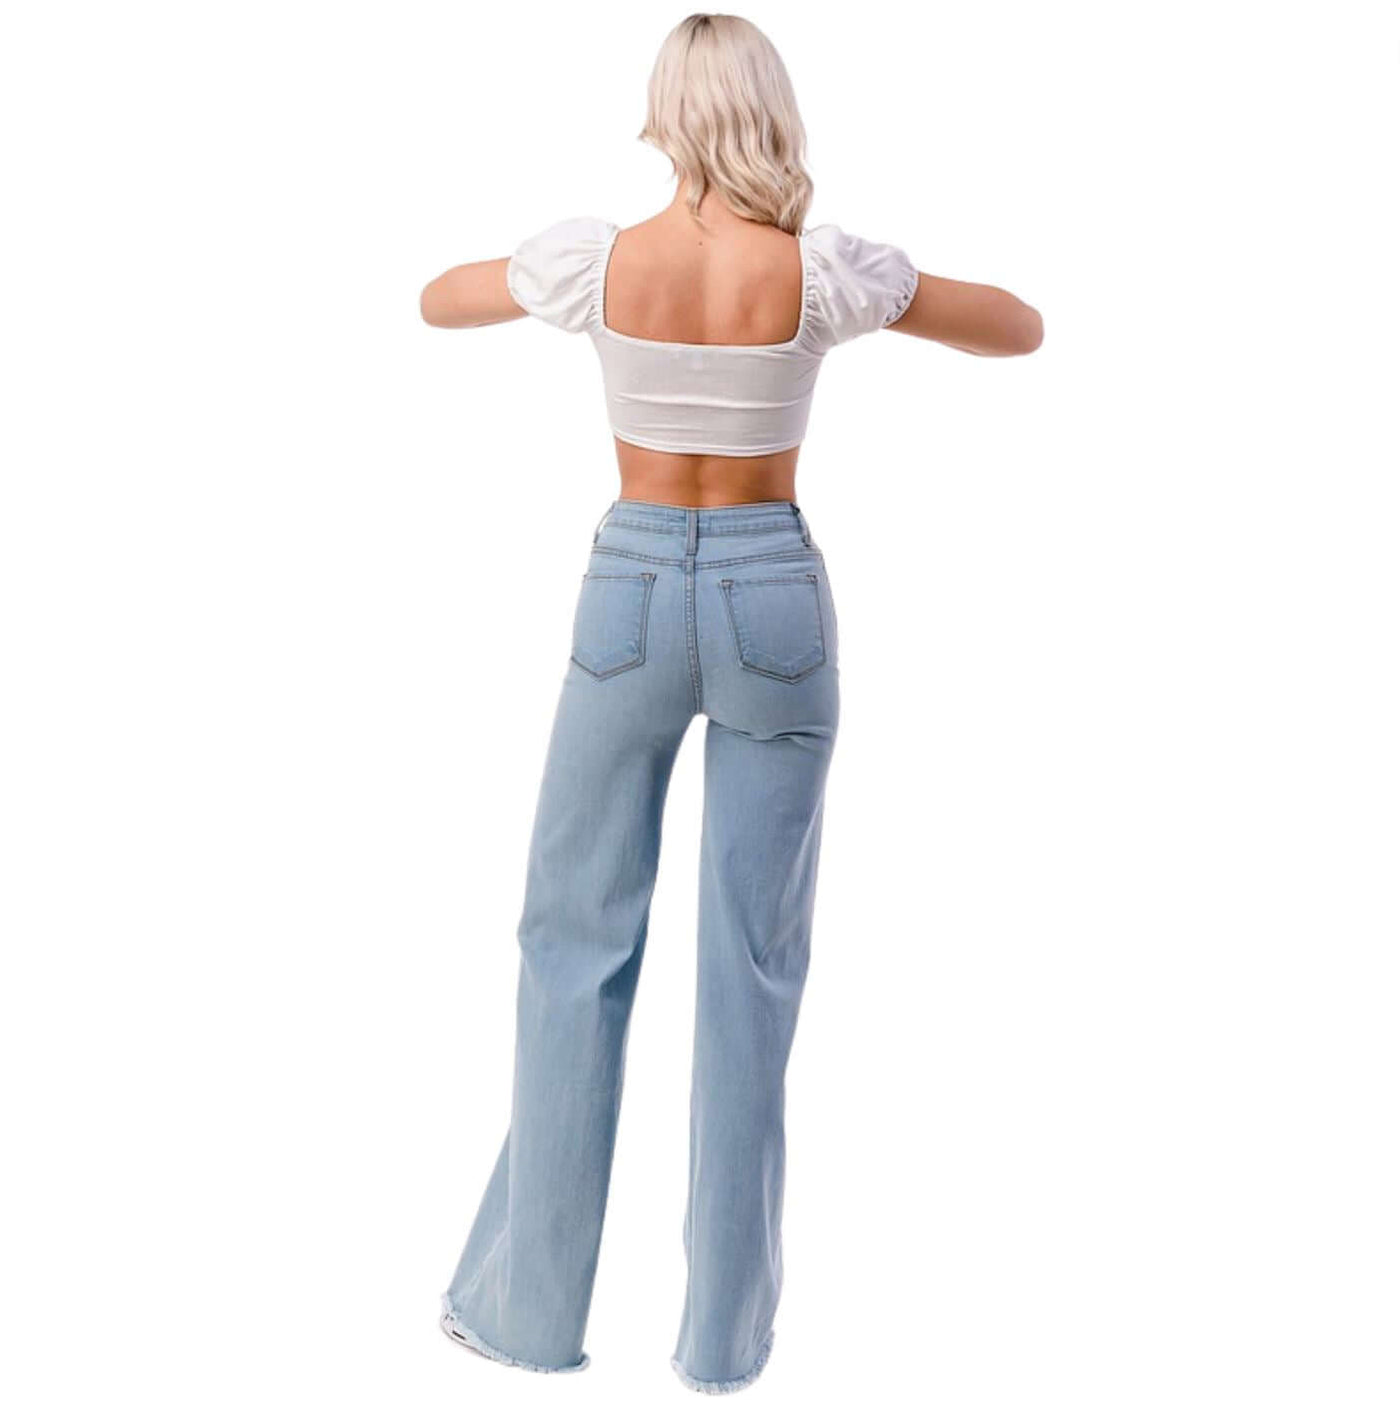 O2 Denim 505 High Waist Flare Jeans in Light Denim | Style PW505 | Women's fashion clothing made in the USA | Classy Cozy Cool American Boutique